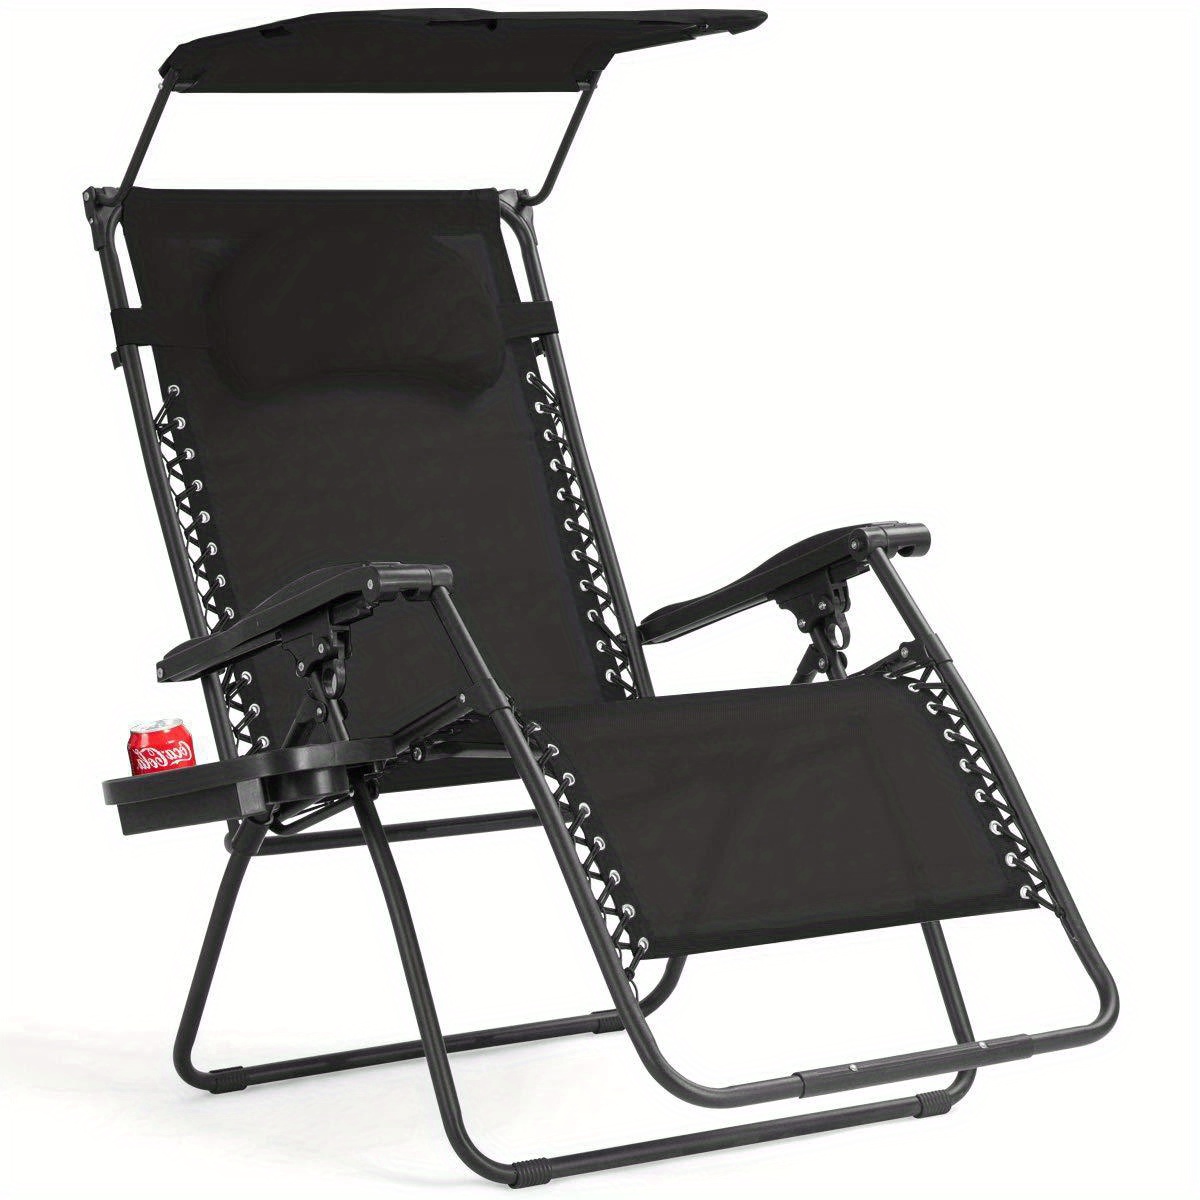 

Lifezeal Folding Recliner 0 Gravity Lounge Chair W/ Shade Canopy Cup Holder Black